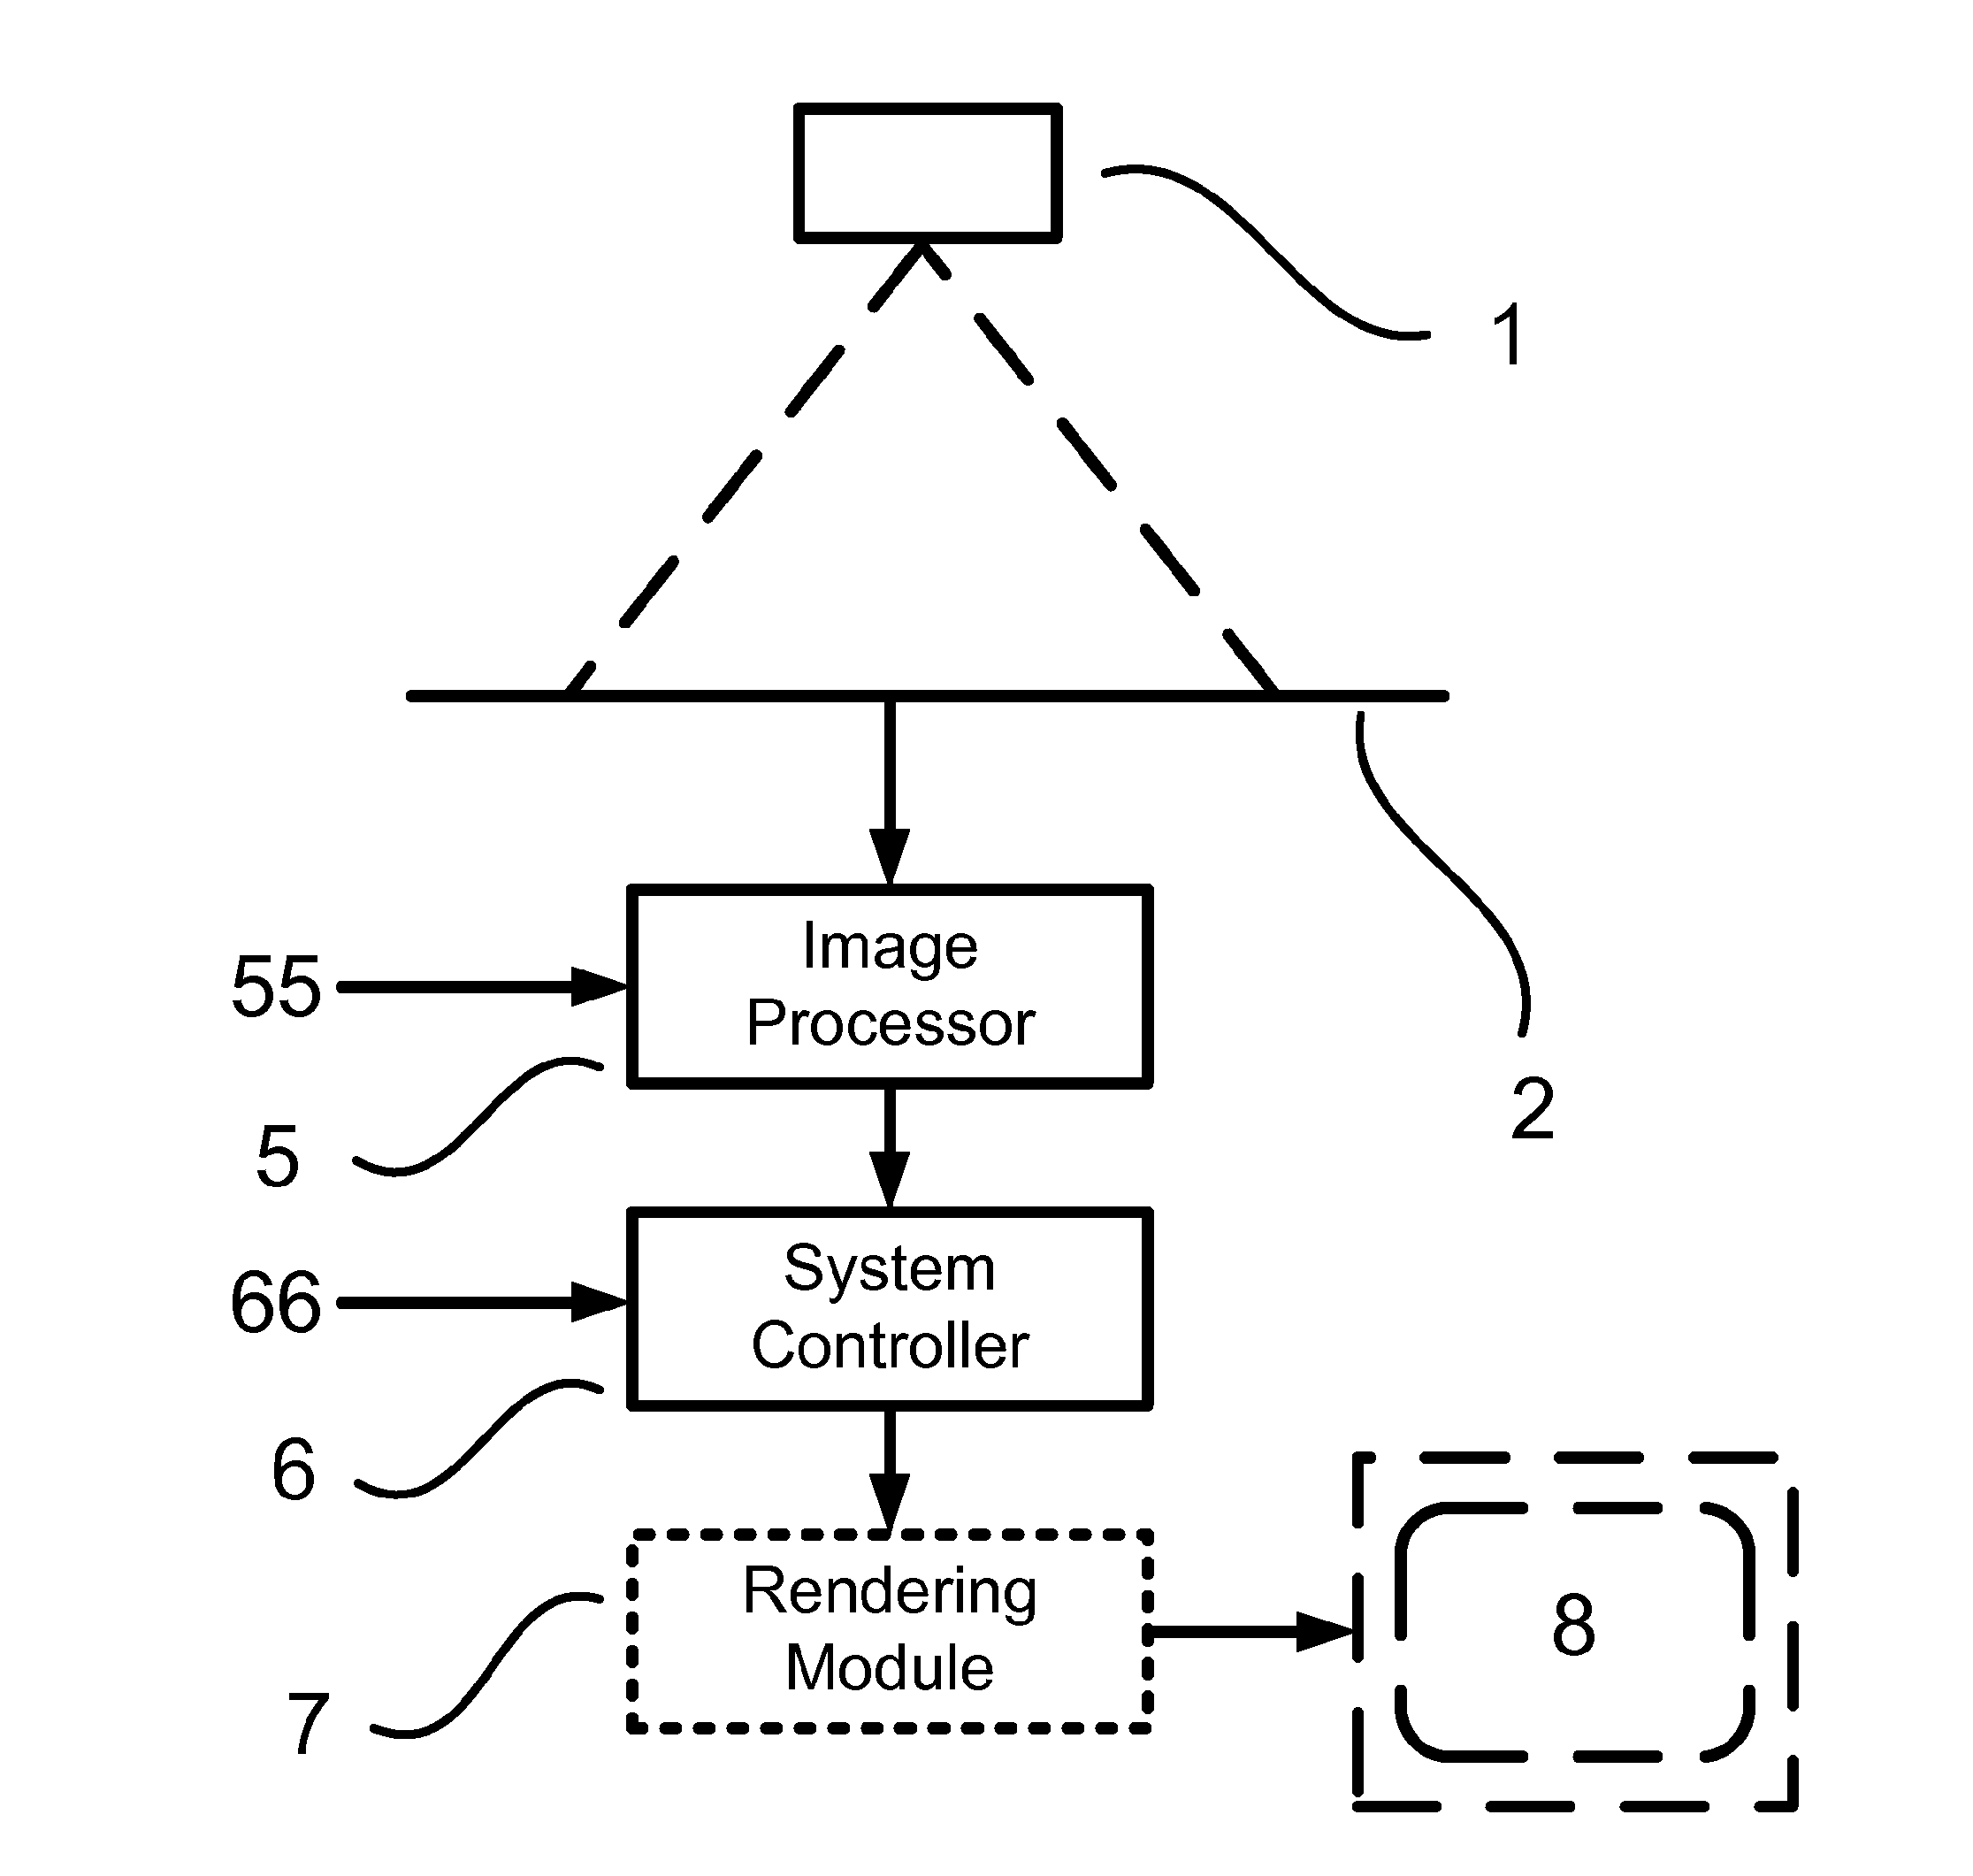 Methods, Devices, Systems, Circuits and Associated Computer Executable Code for Detecting and Predicting the Position, Orientation and Trajectory of Surgical Tools